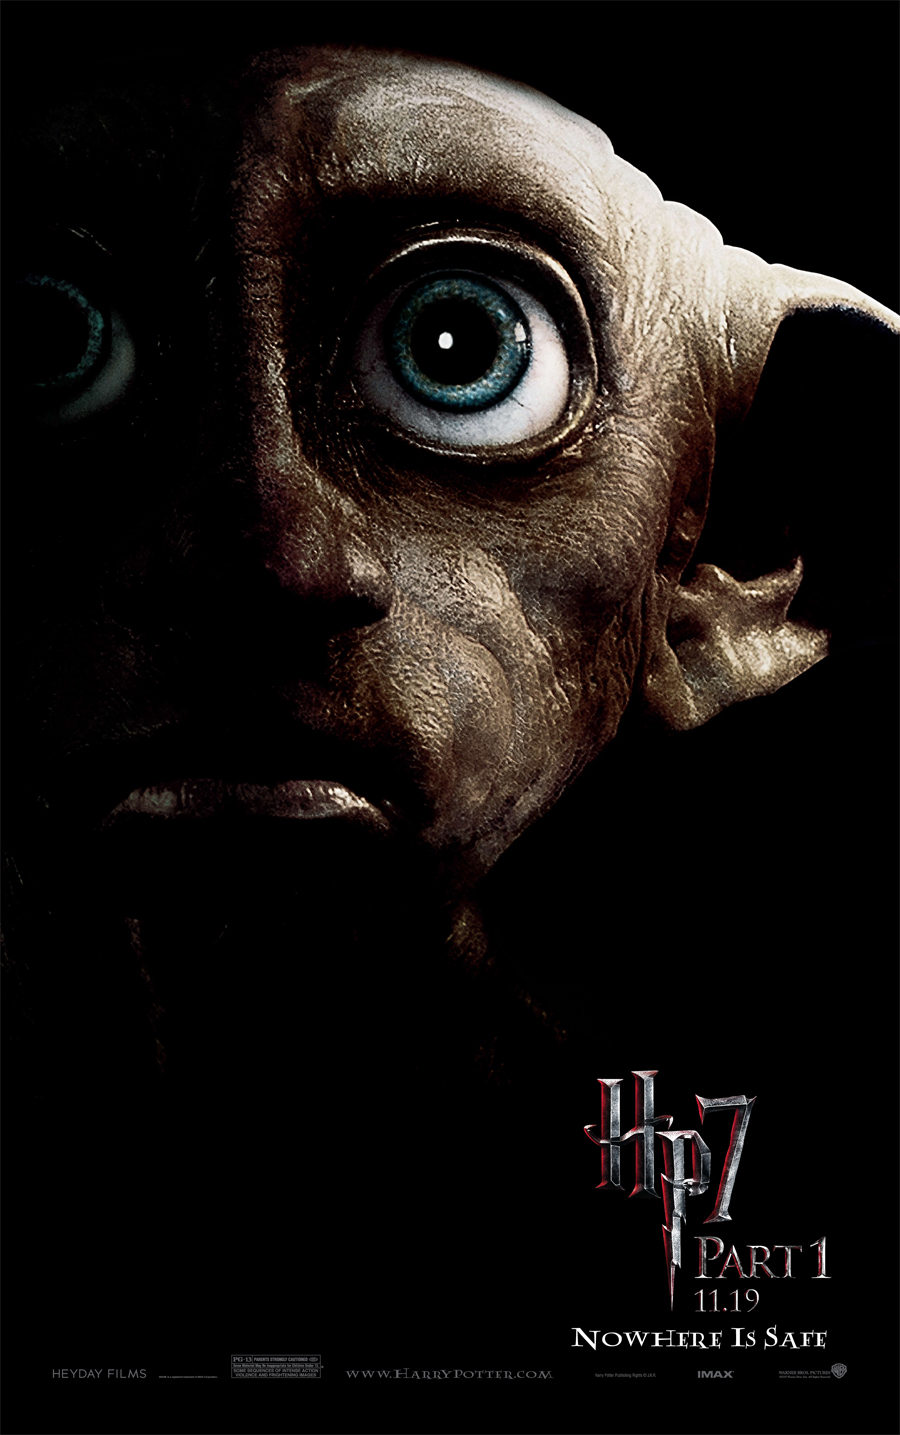 Dobby The House Elf From Harry Potter And Deathly